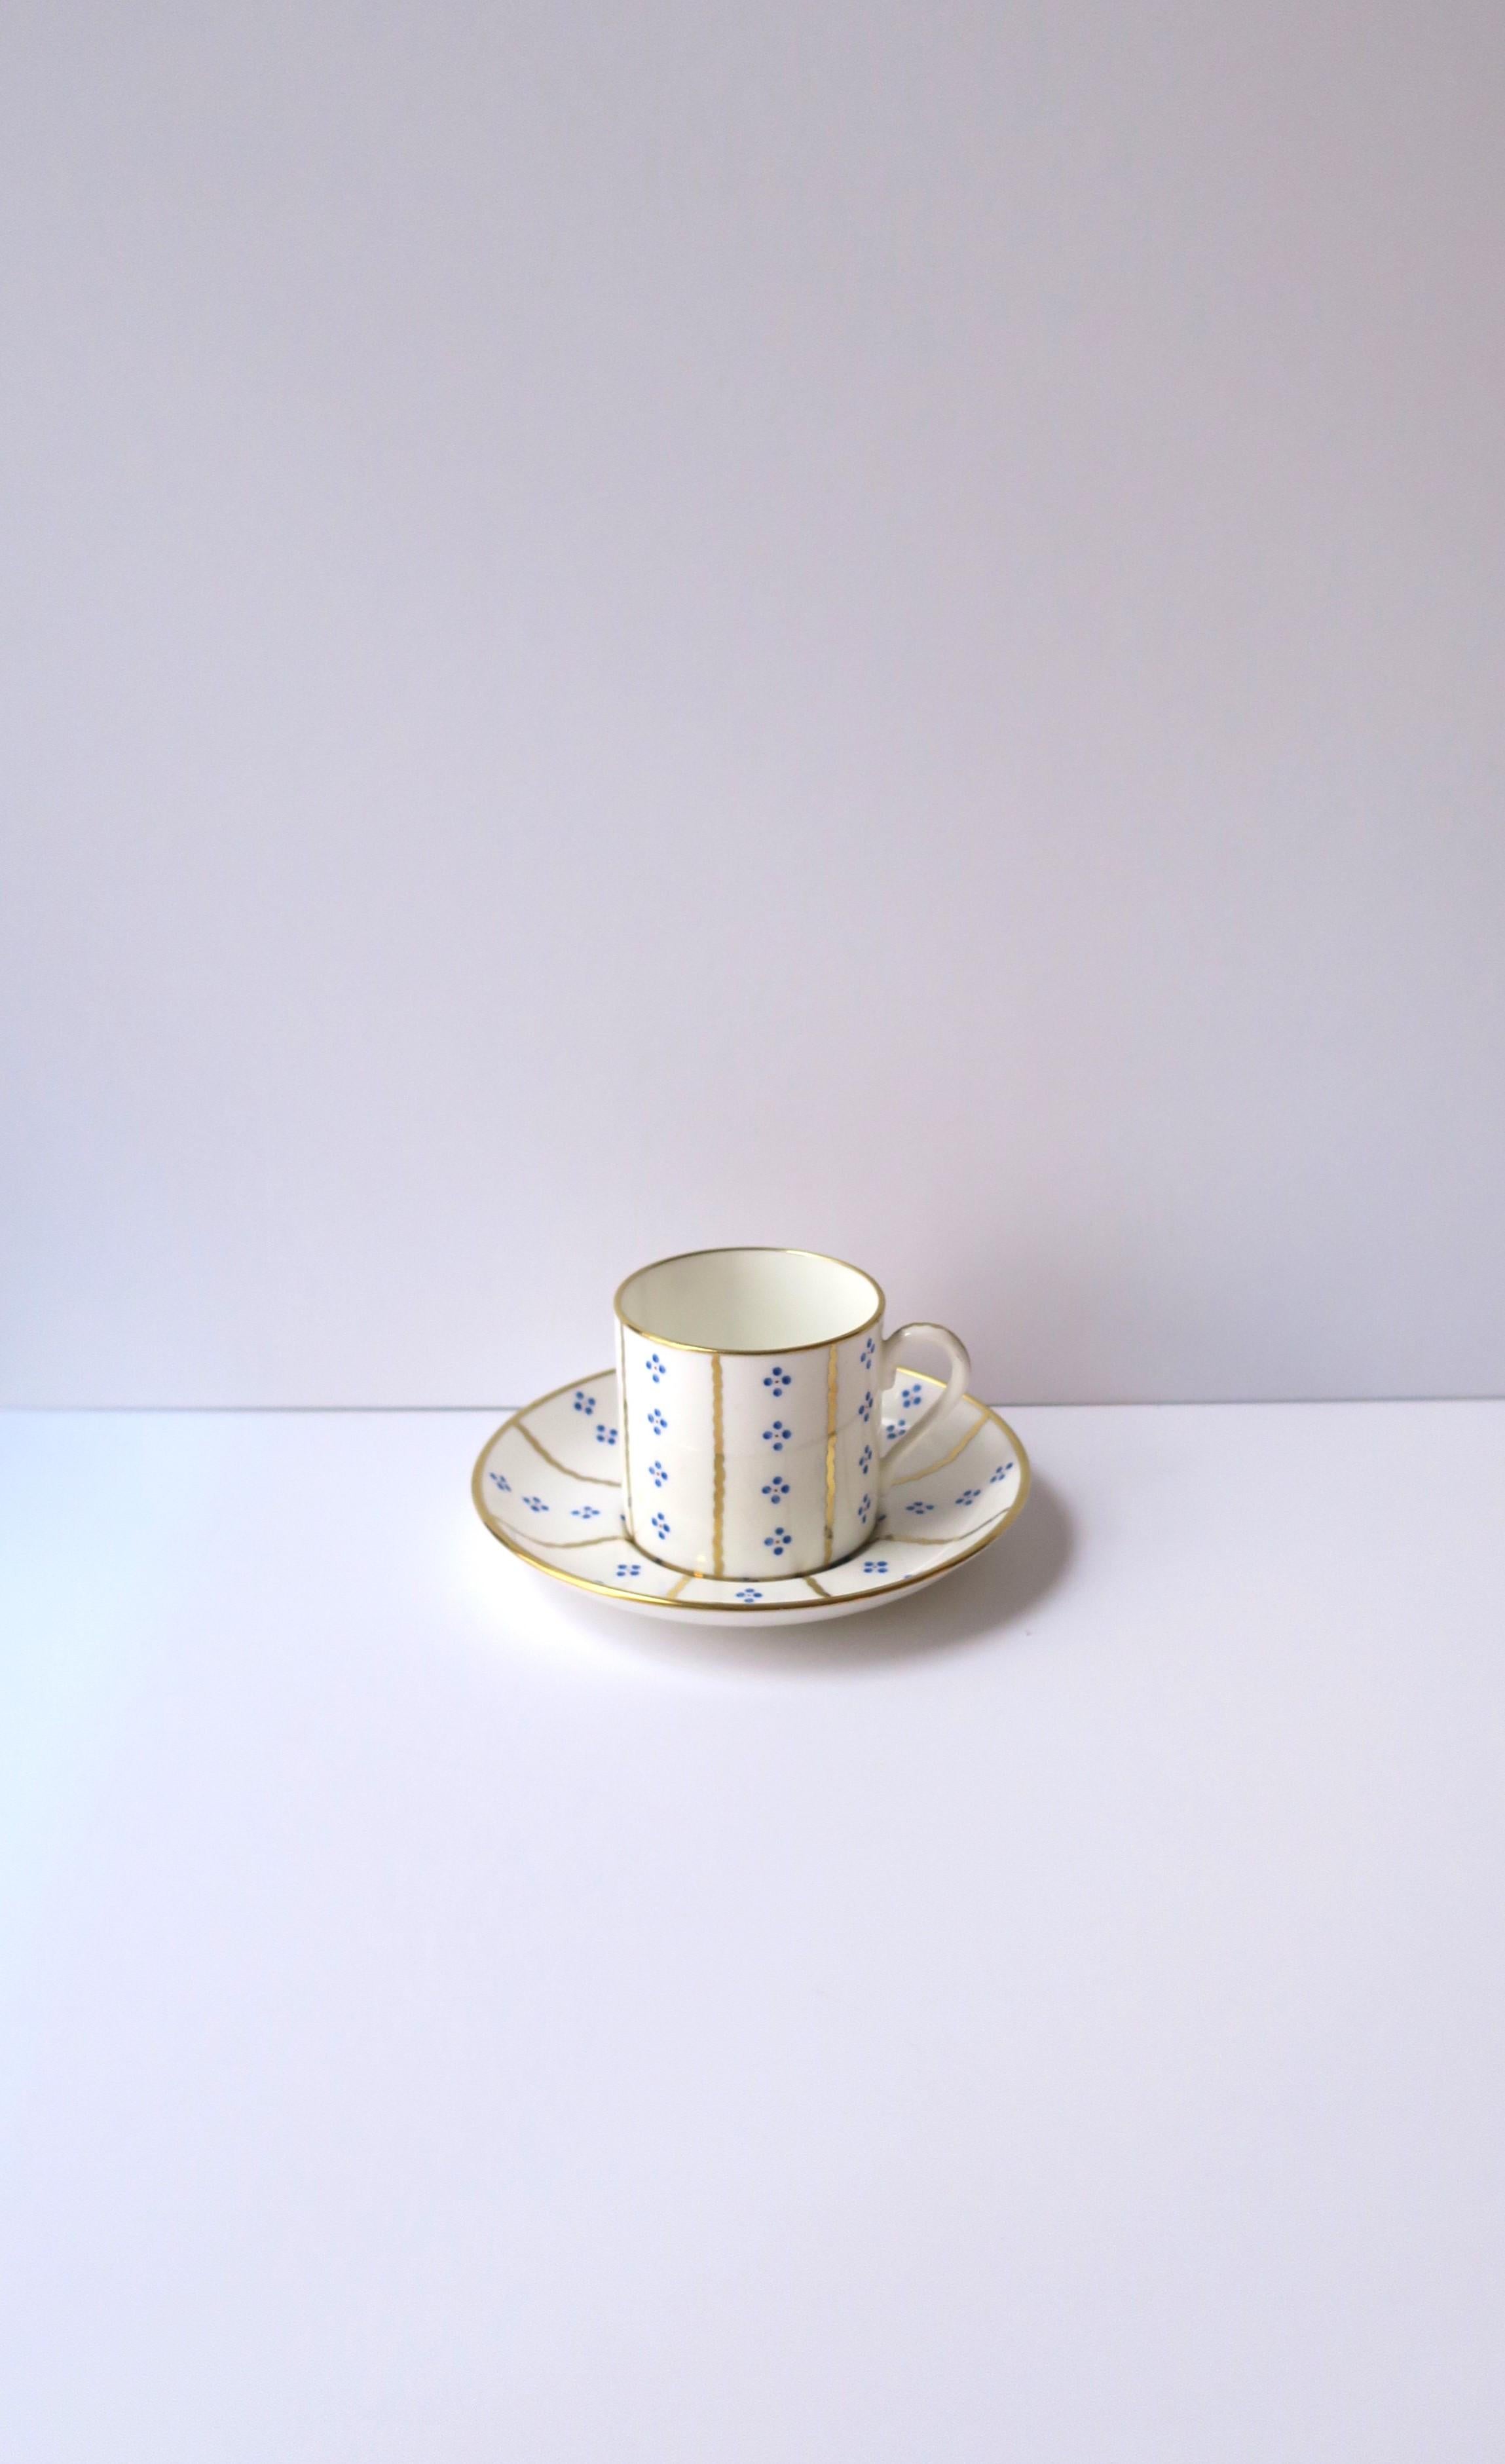 A beautiful blue and gold on white porcelain demitasse coffee or tea cup and saucer set, made exclusively for luxury retailer Tiffany & Co New York, by Hammersley, circa mid-20th century, England. Cup is a 1/2 size cup to traditional cups (aka